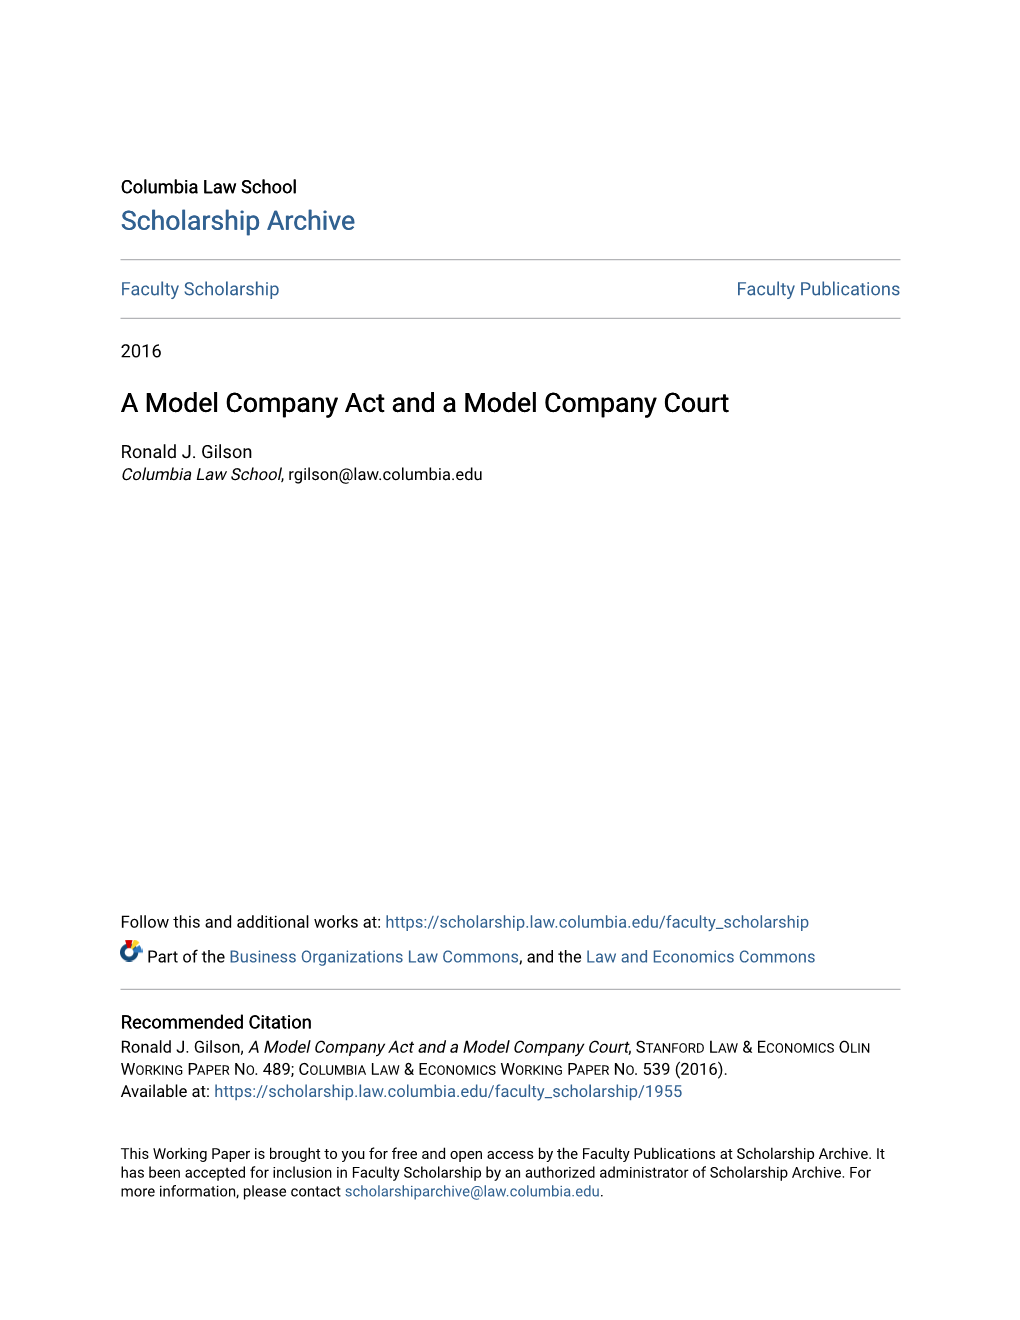 A Model Company Act and a Model Company Court